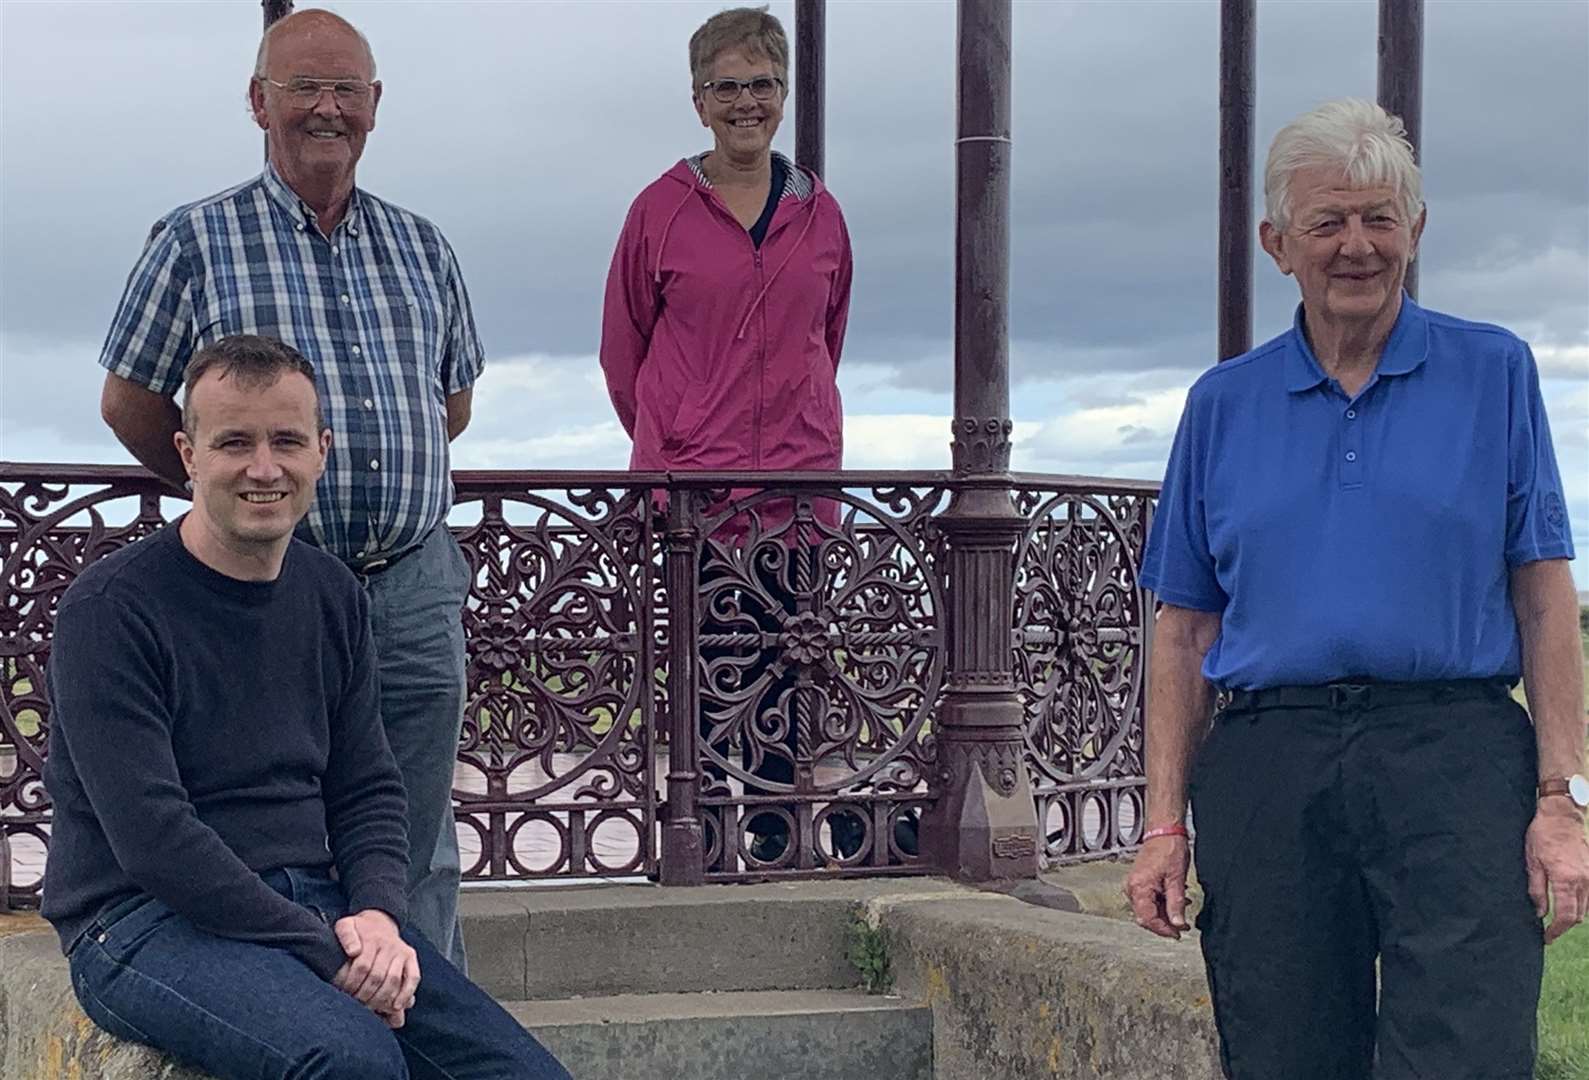 Four community groups were pulling together to help revitalise Nairn.